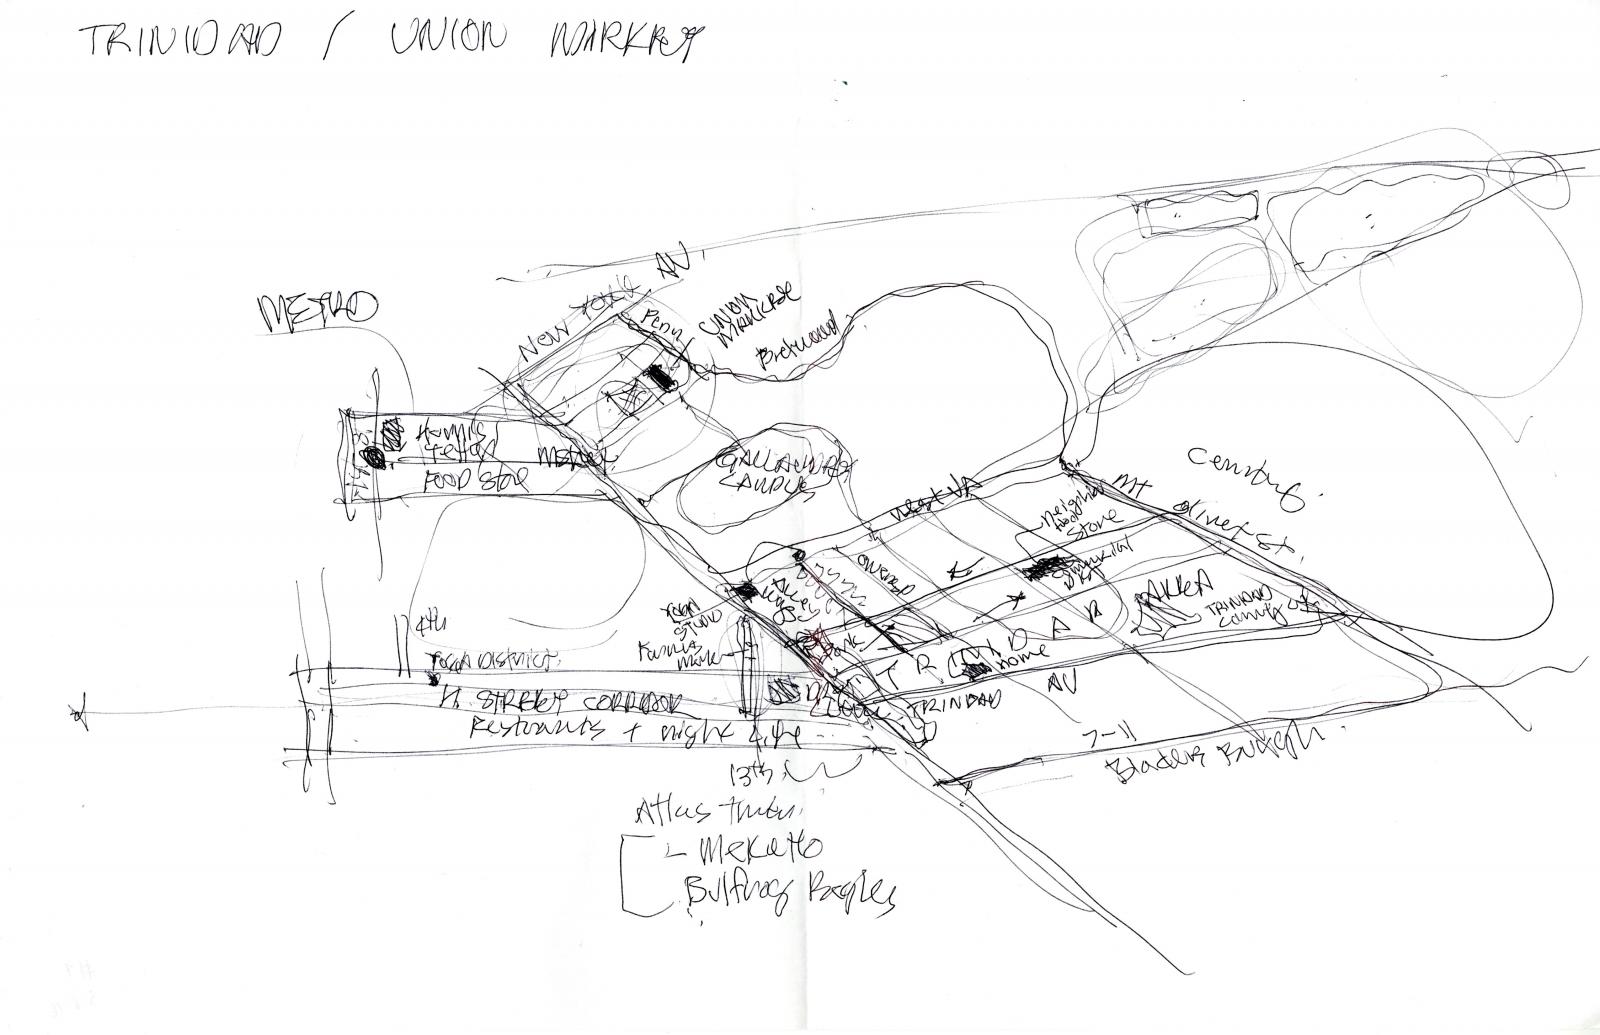 A cognitive map of H St., drawn by one of the interview subjects